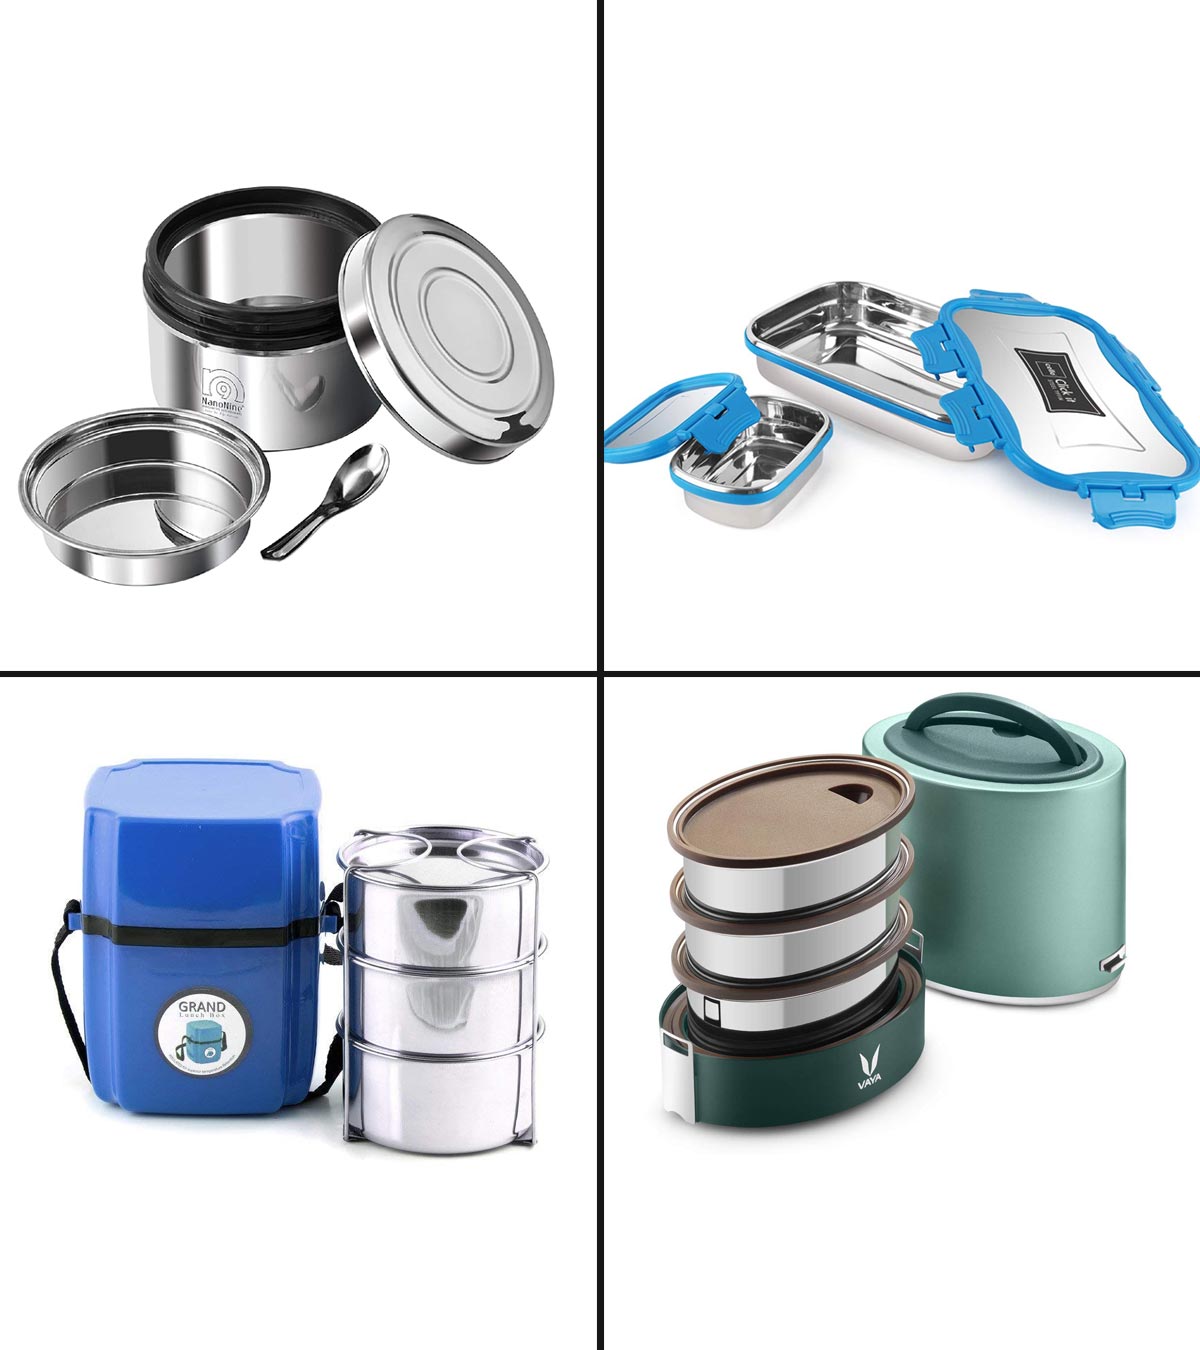 https://www.momjunction.com/wp-content/uploads/2020/10/13-Best-Stainless-Steel-Lunch-Boxes-In-India-2020.jpg